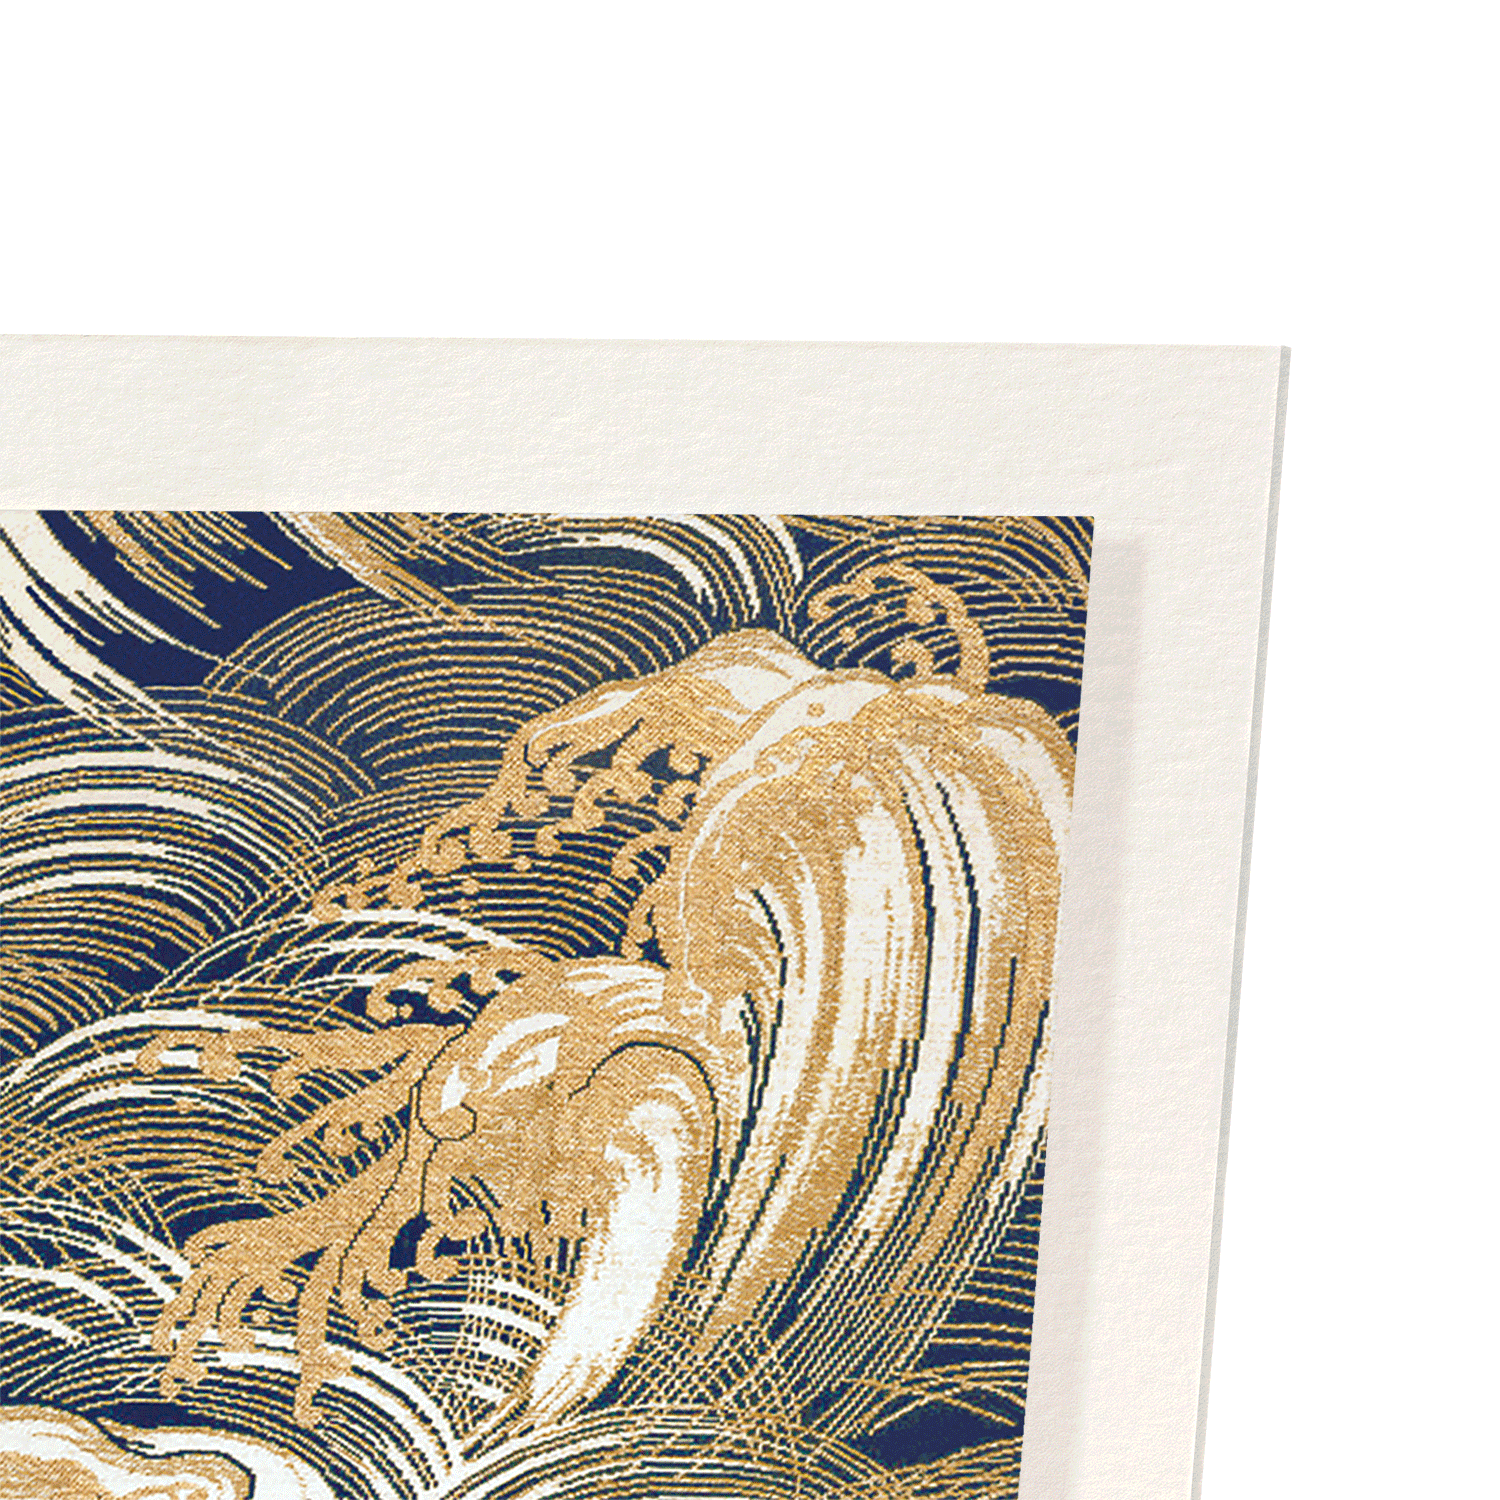 DESIGN OF WAVES (EARLY 20TH C.)